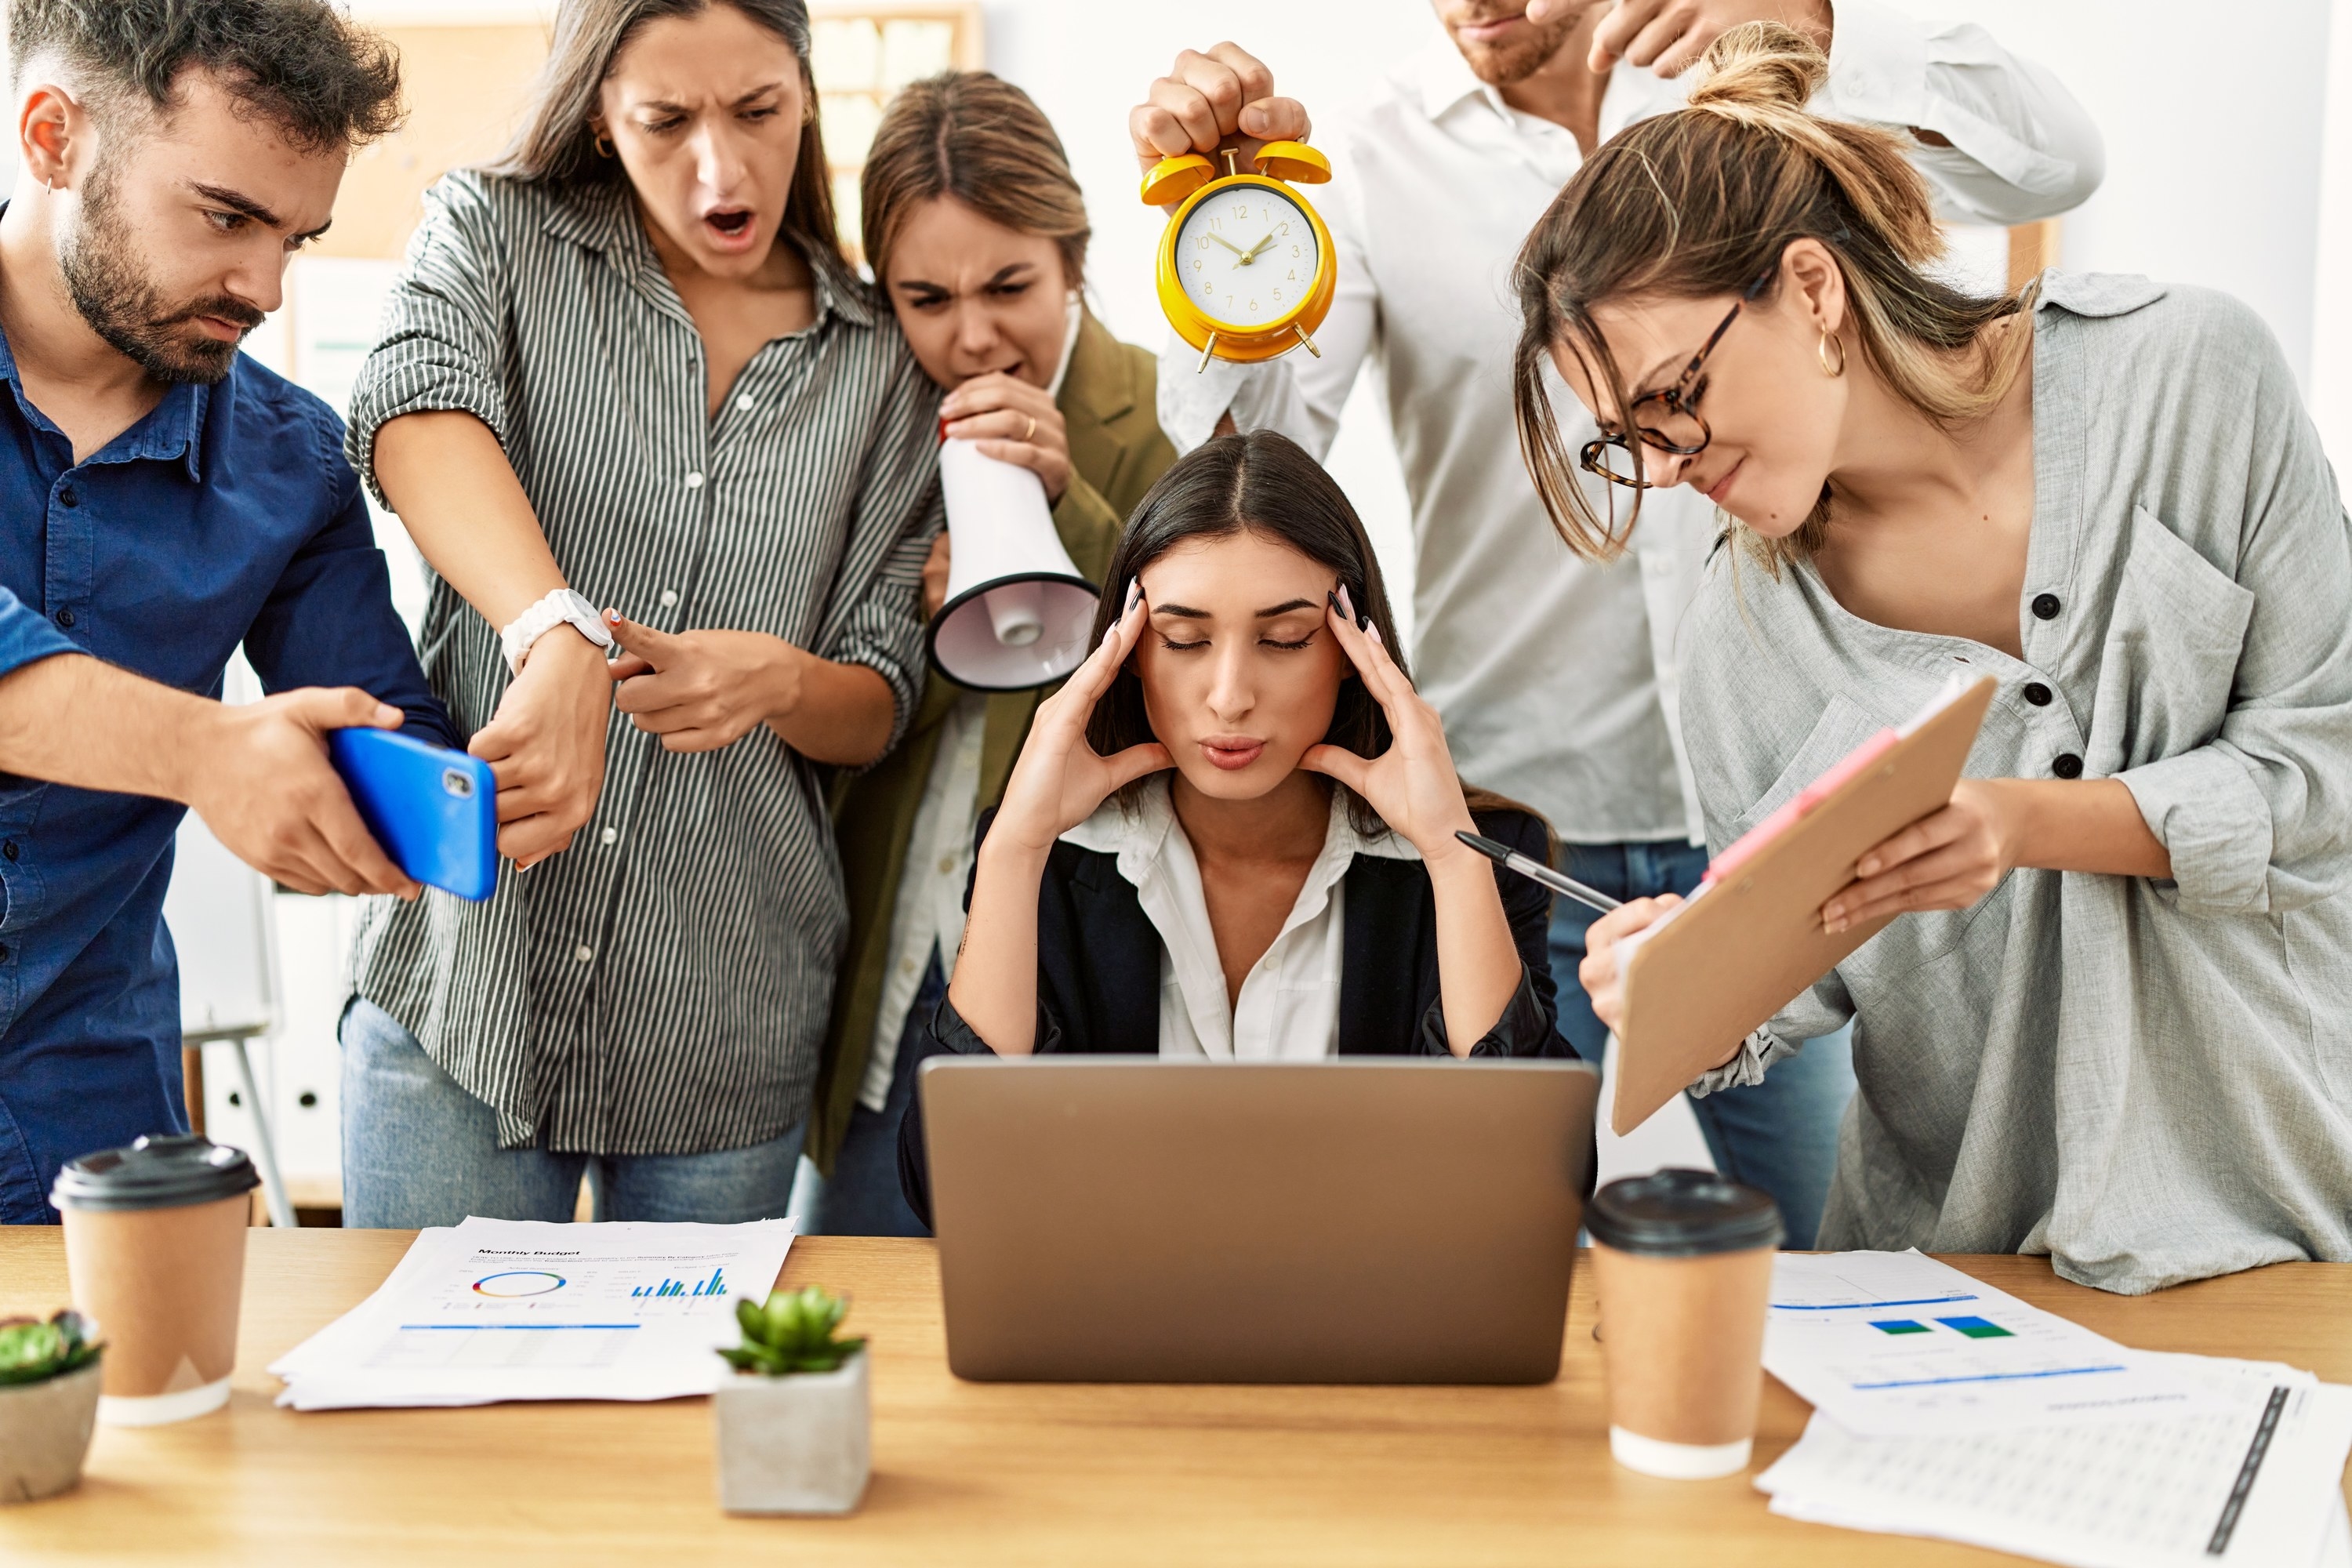 A stressed woman working while surrounded by people